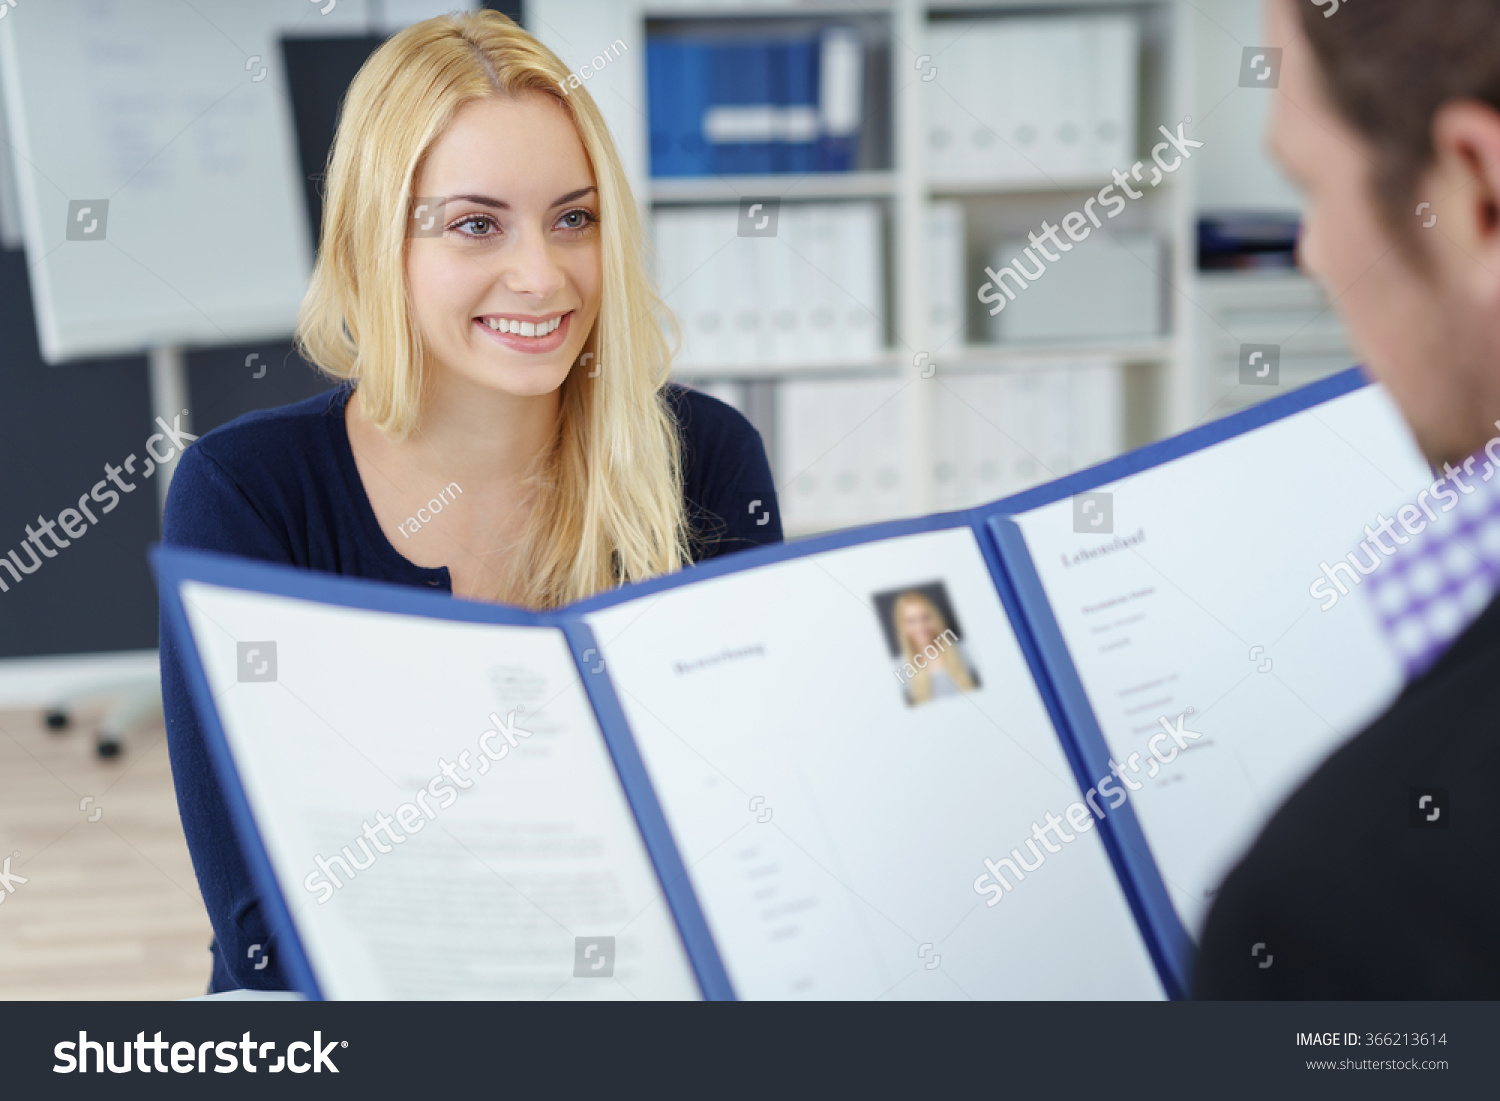 Attractive young businesswoman in a job interview with a corporate personnel manager who is reading her CV in a blue folder, over the shoulder focus to the young applicant #366213614